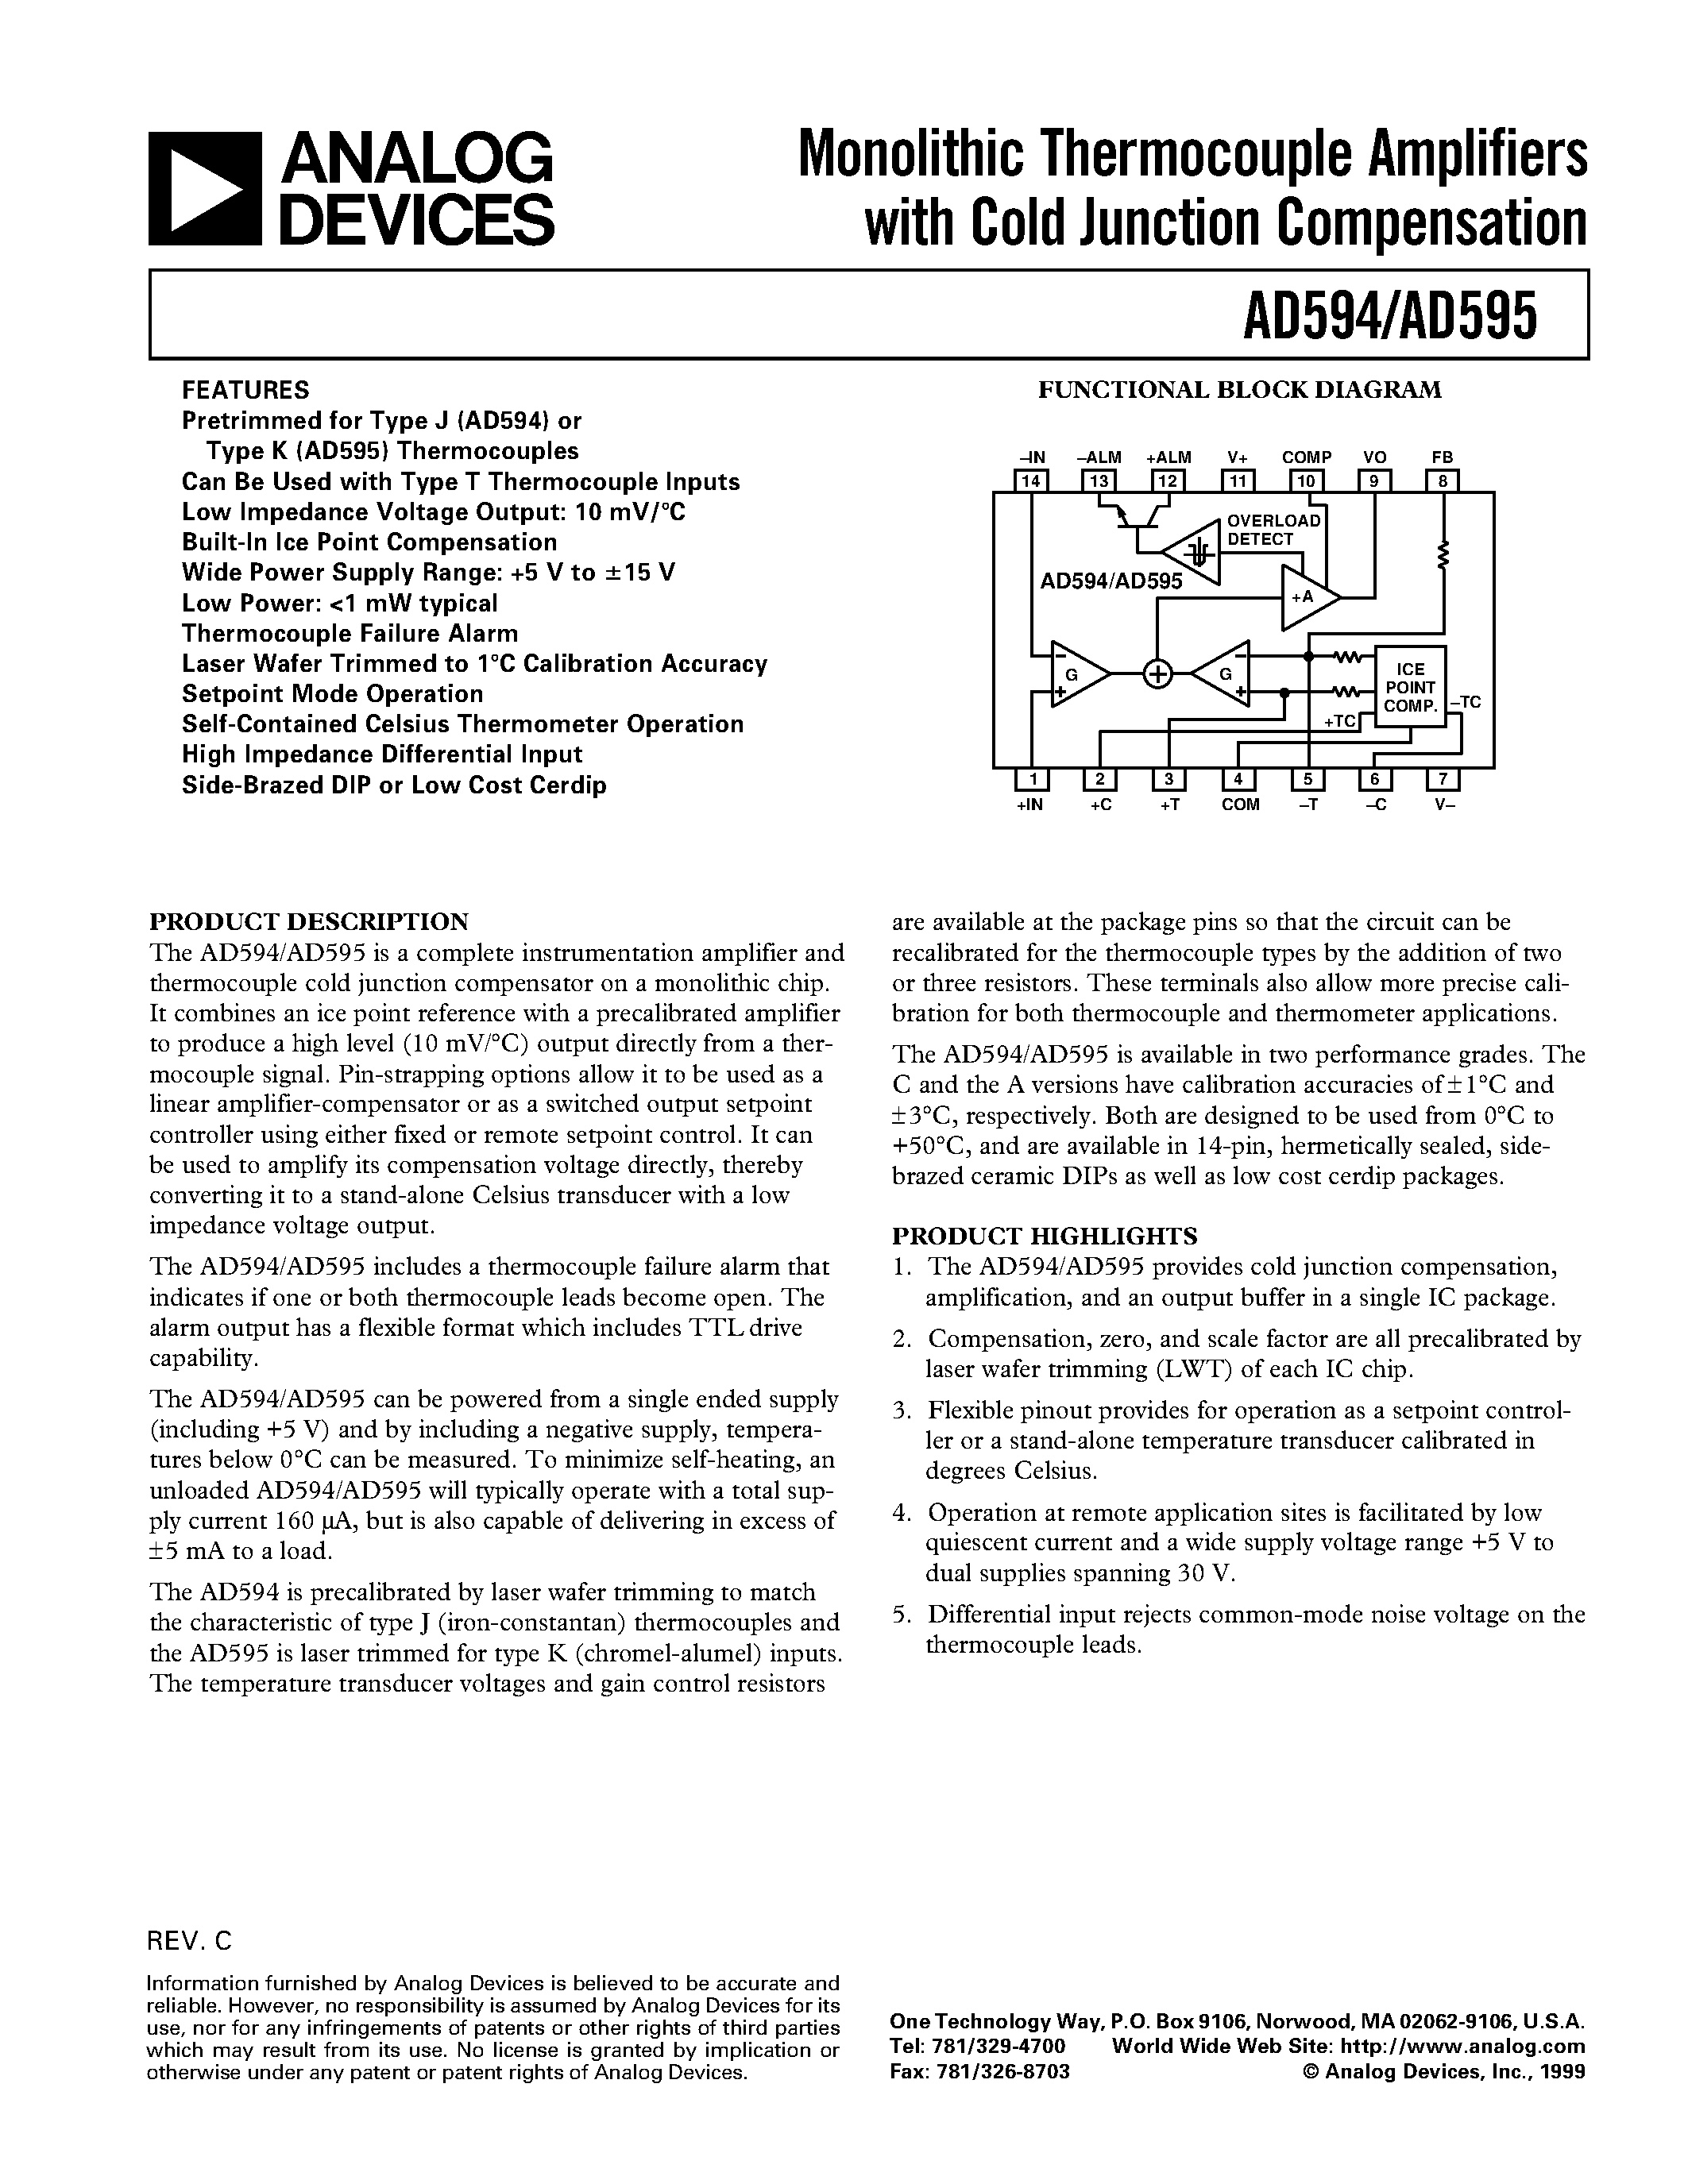 Datasheet AD595AD - Monolithic Thermocouple Amplifiers with Cold Junction Compensation page 1